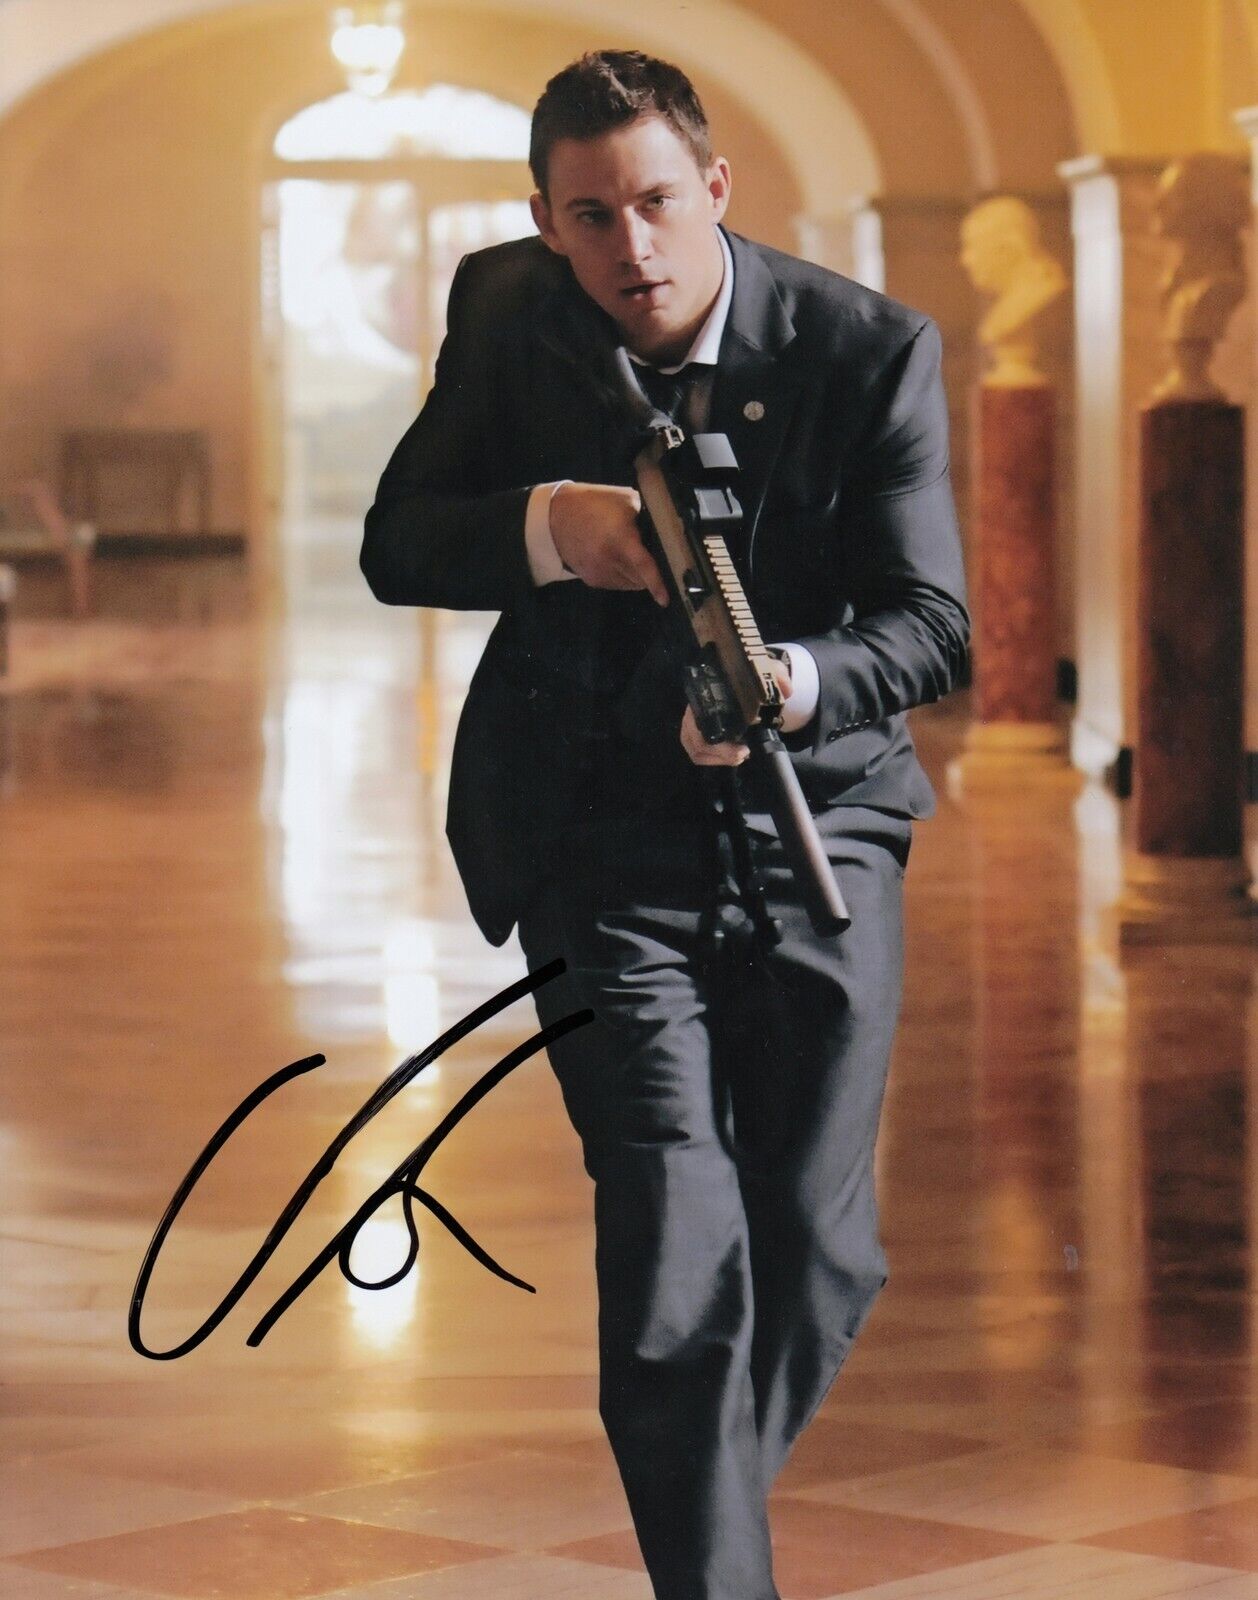 Channing Tatum #0 8x10 Signed Photo Poster painting w/ COA Actor 031019